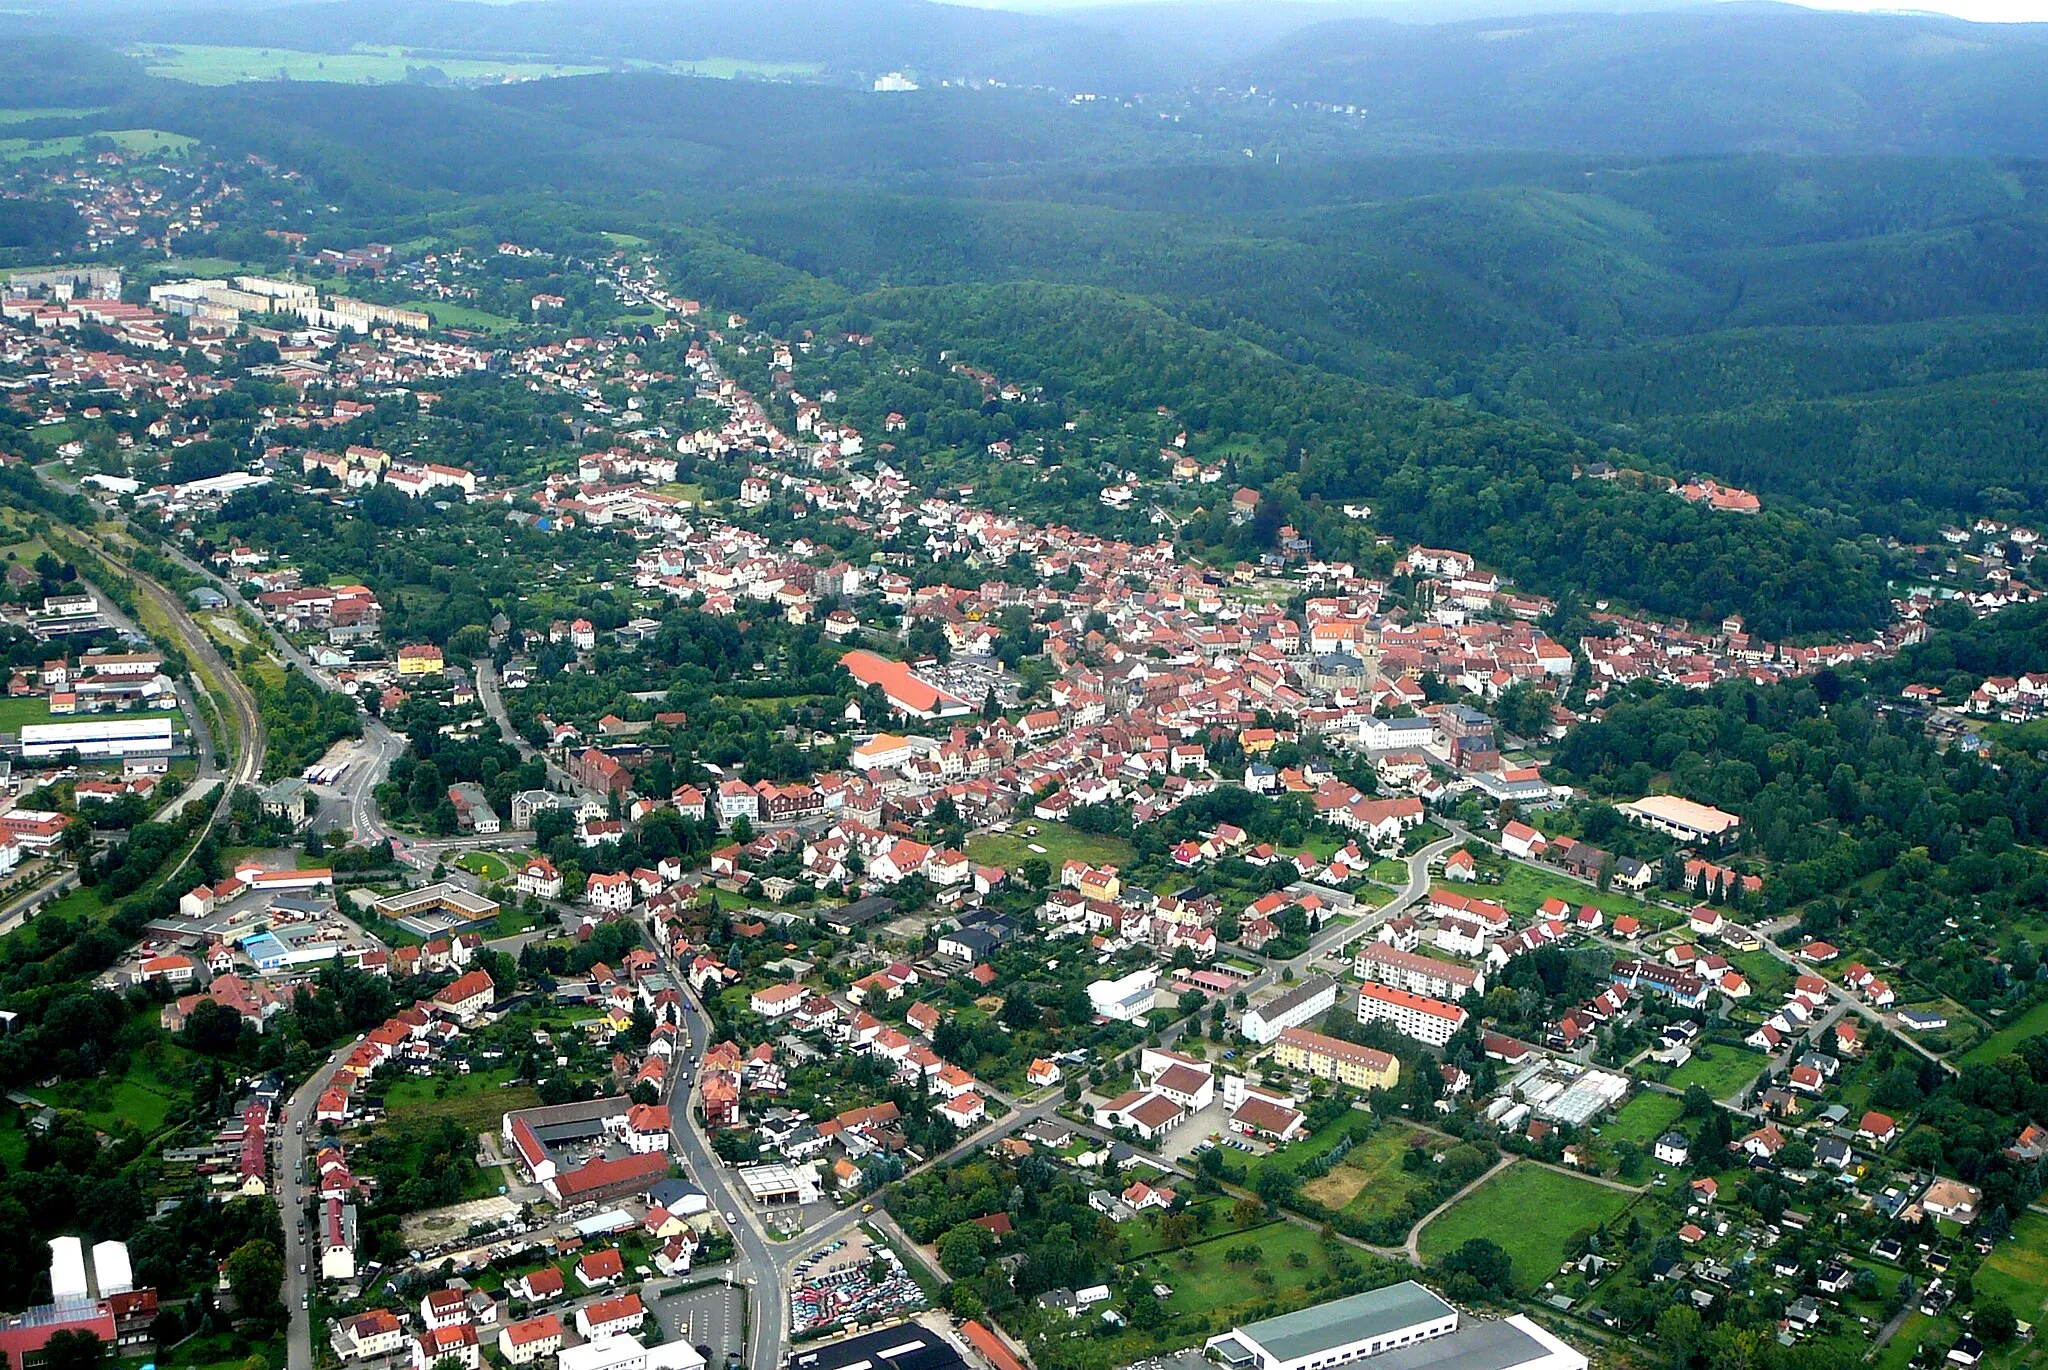 Photo showing: Aerial view of the town of Waltershausen, Germany.